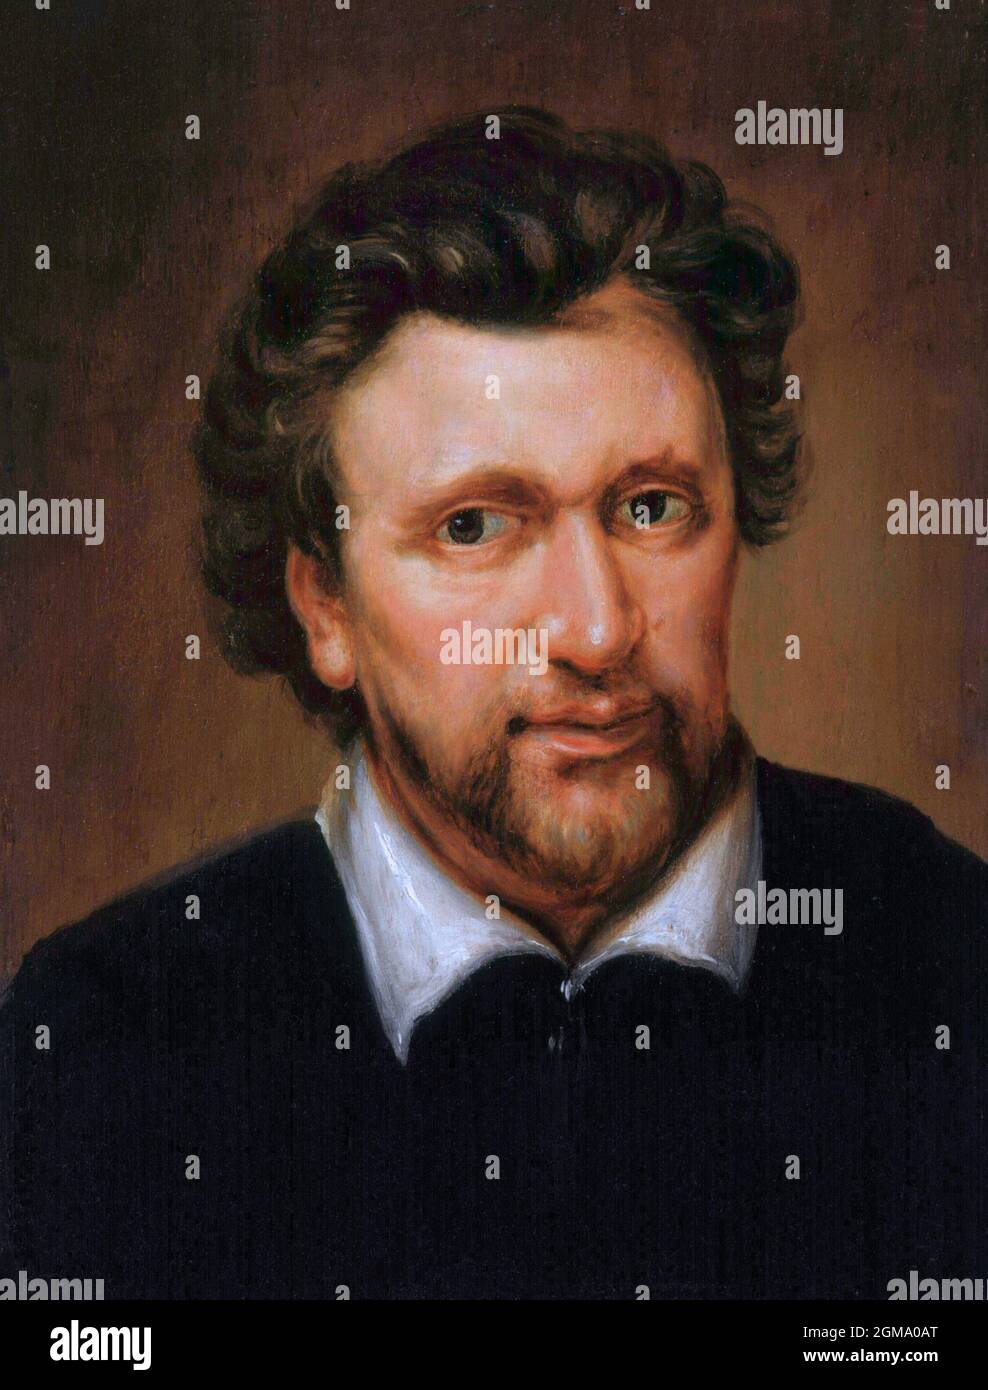 Ben Jonson. Portrait of the English playwright after Abraham van Blijenberch oil on canvas, early 19th century Stock Photo